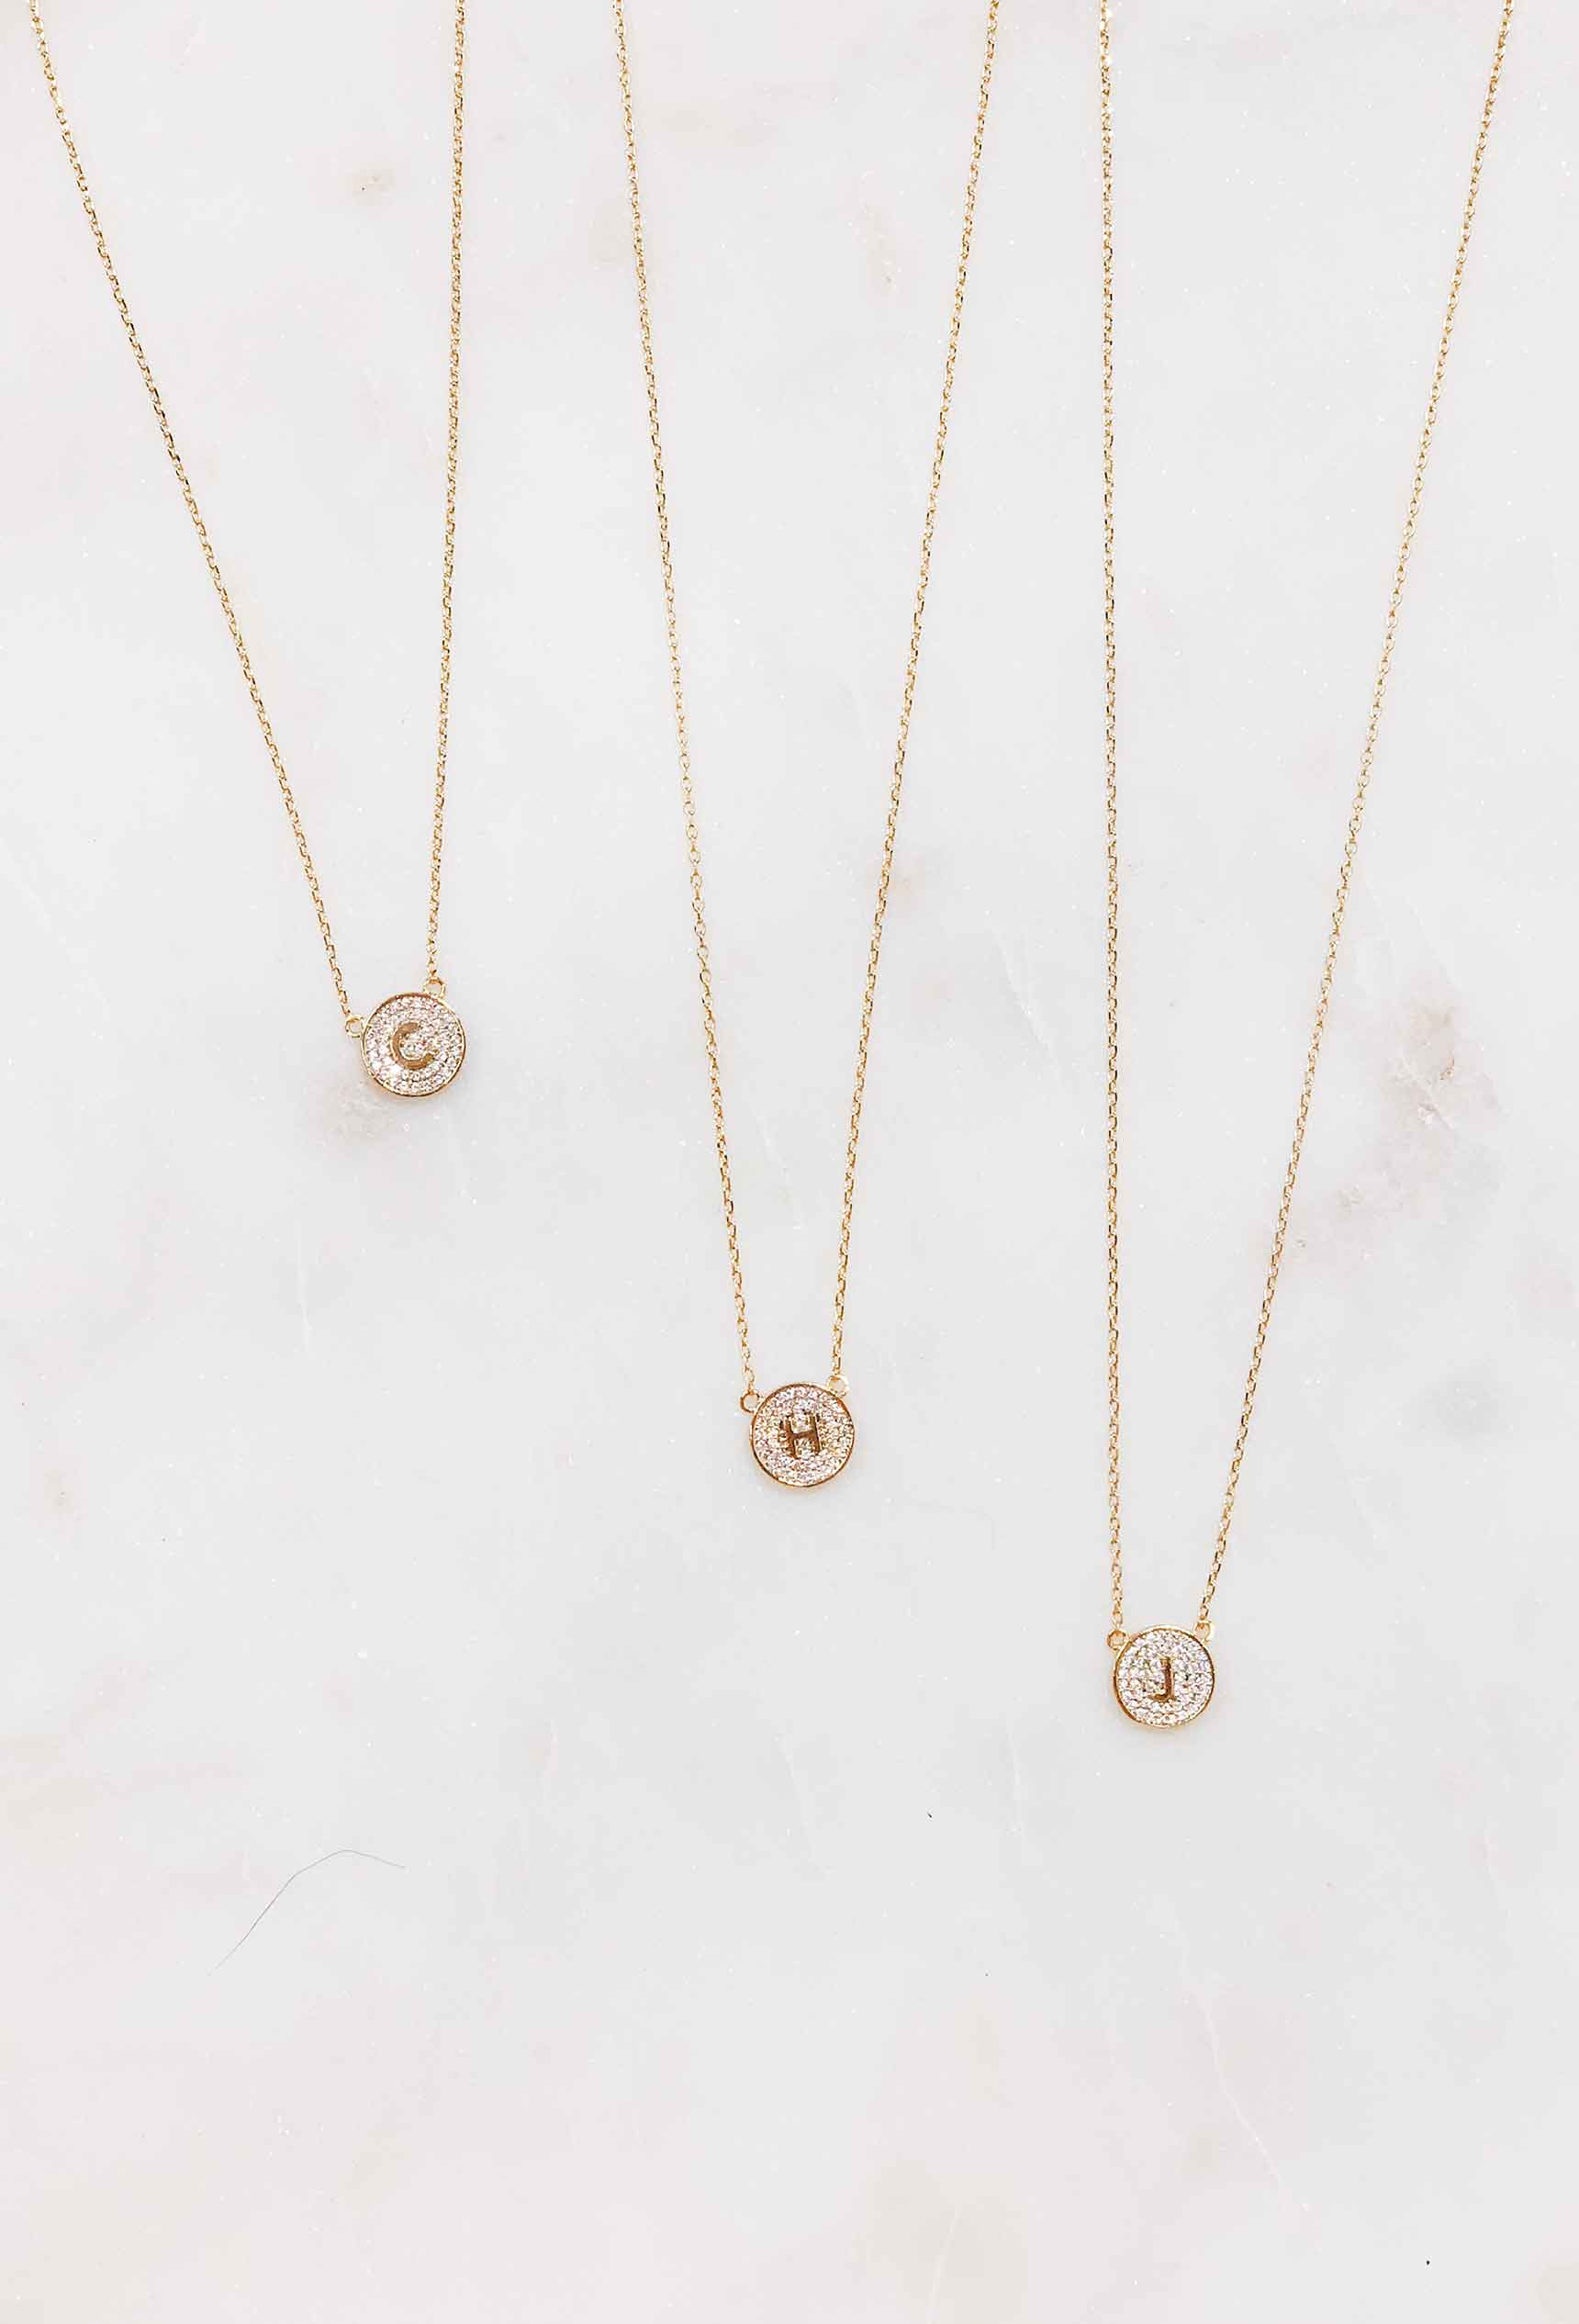 Gold Pave Coin Initial Necklace, circle gold crystal initial necklace 